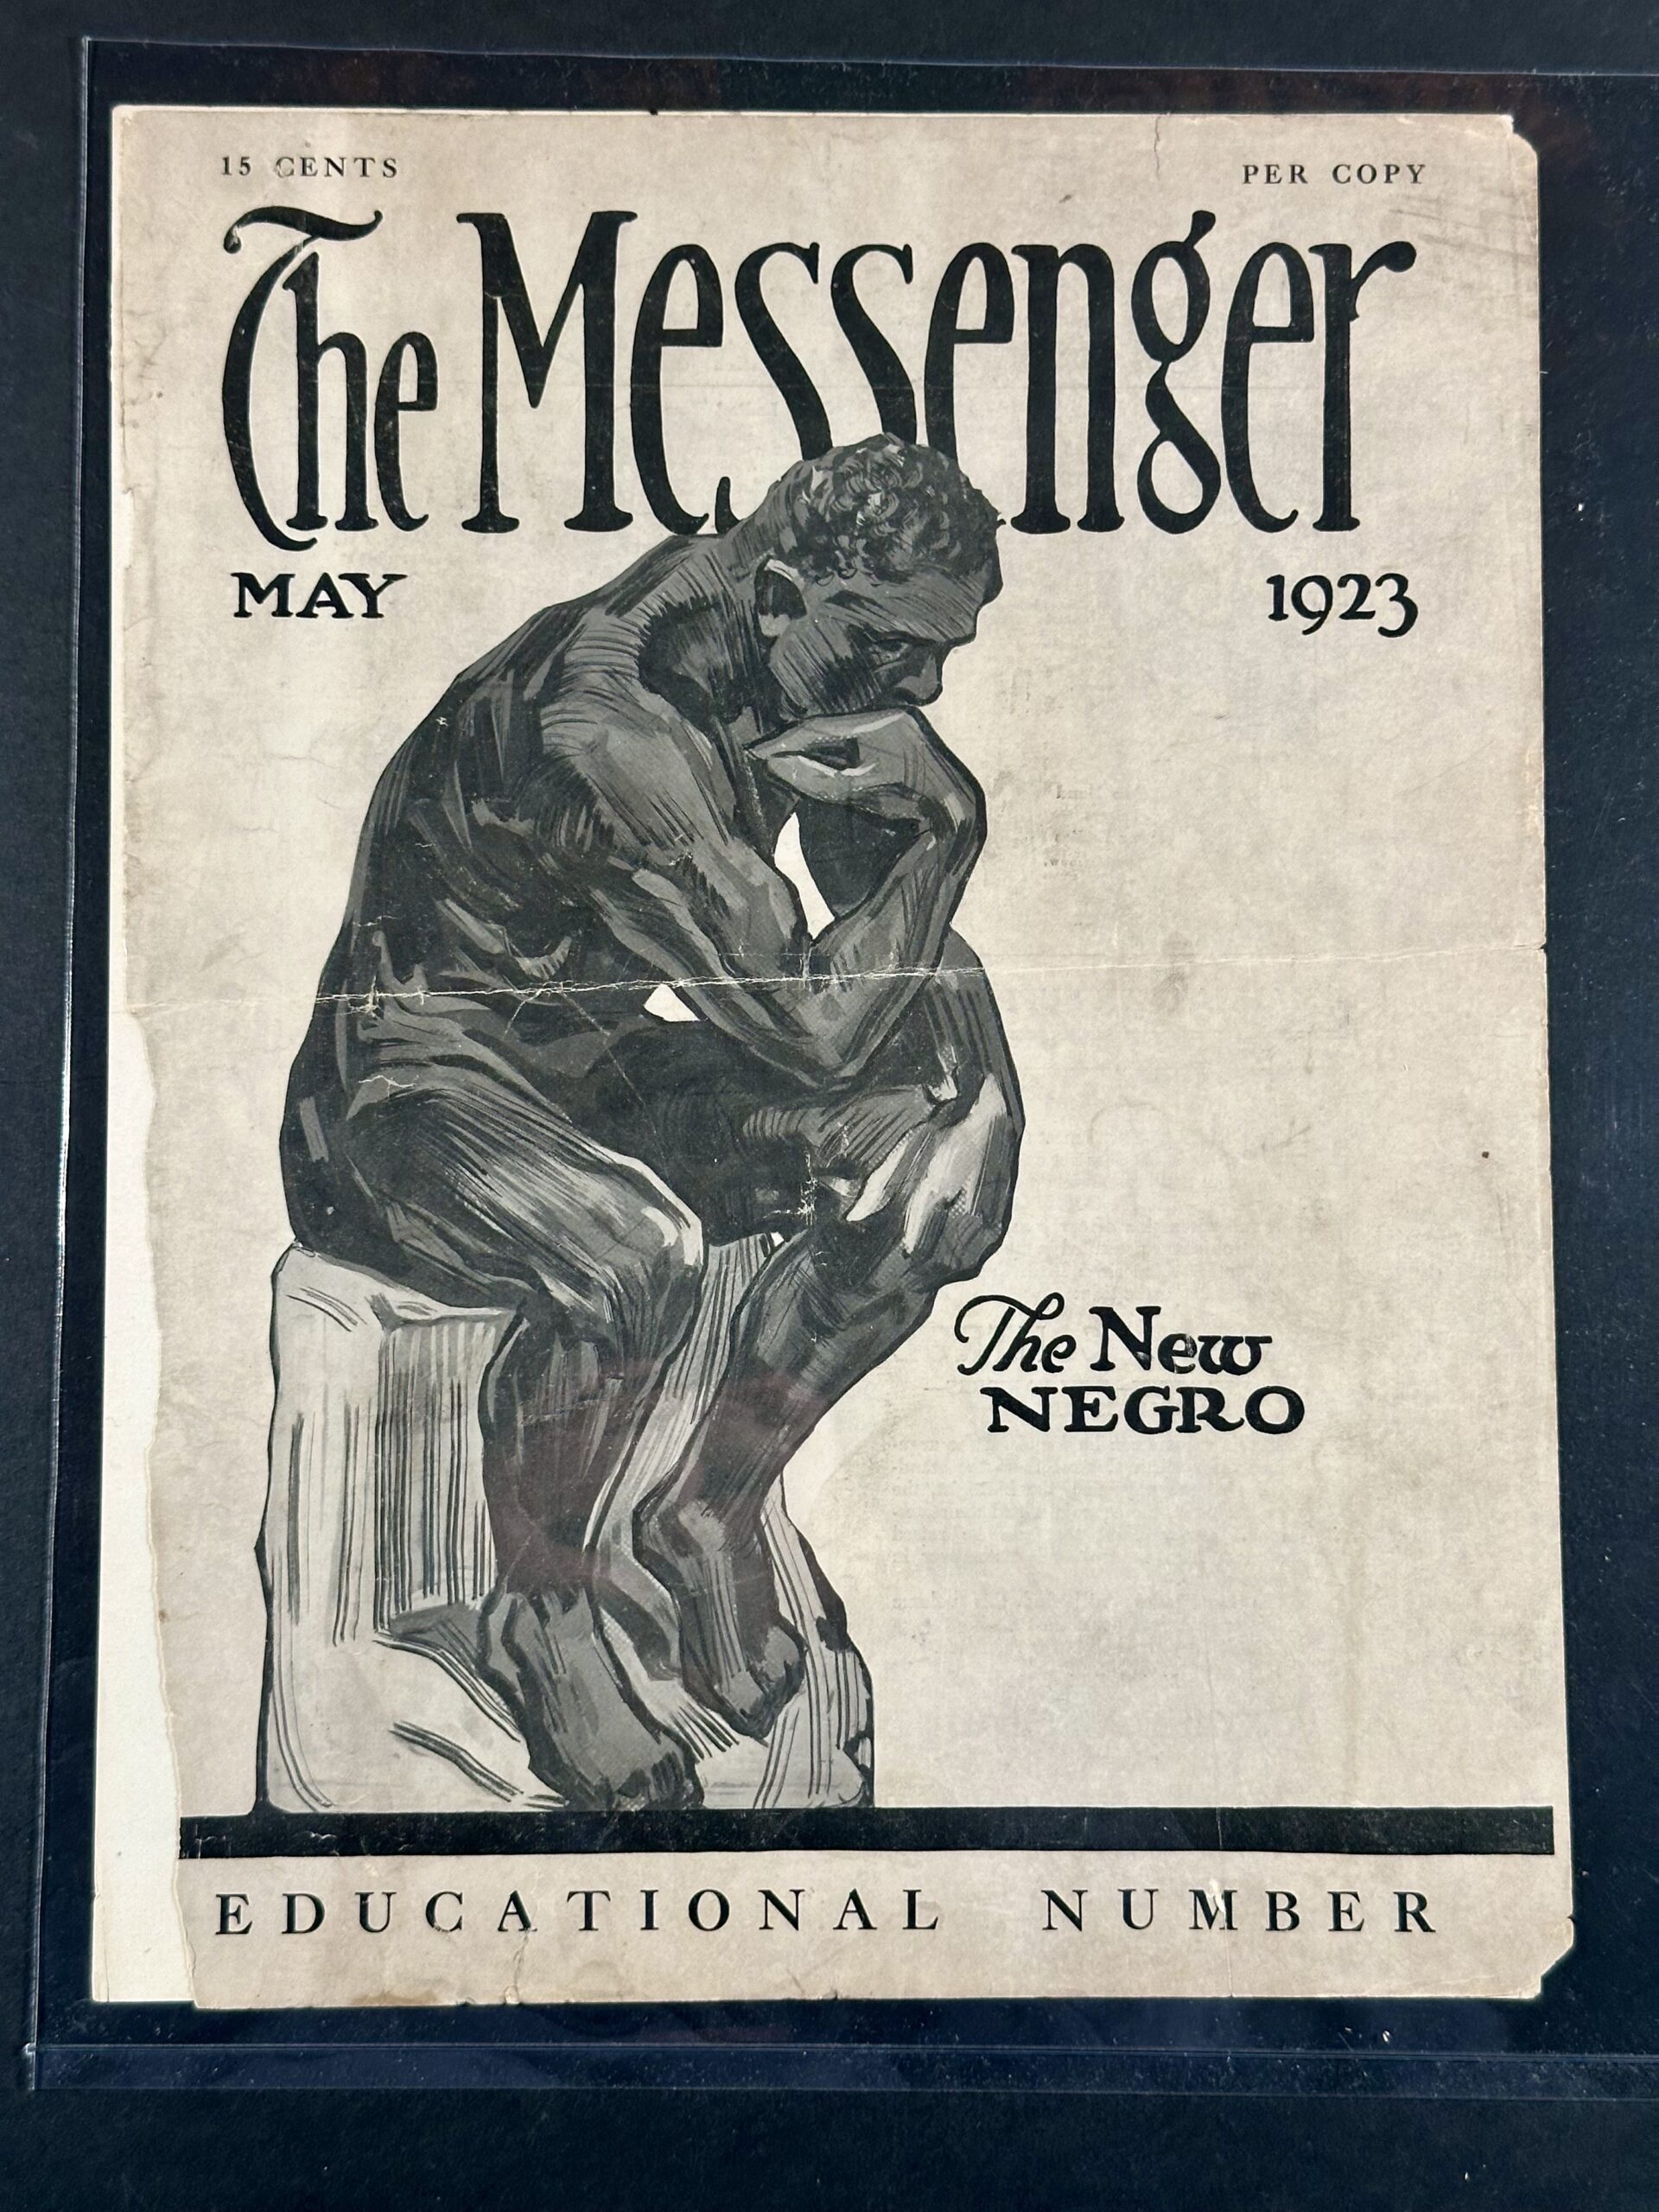 Randolph, A. Phillip and Owen, Chandler. The Messenger, [May 1923], from the Alice Dunbar Nelson Papers collection